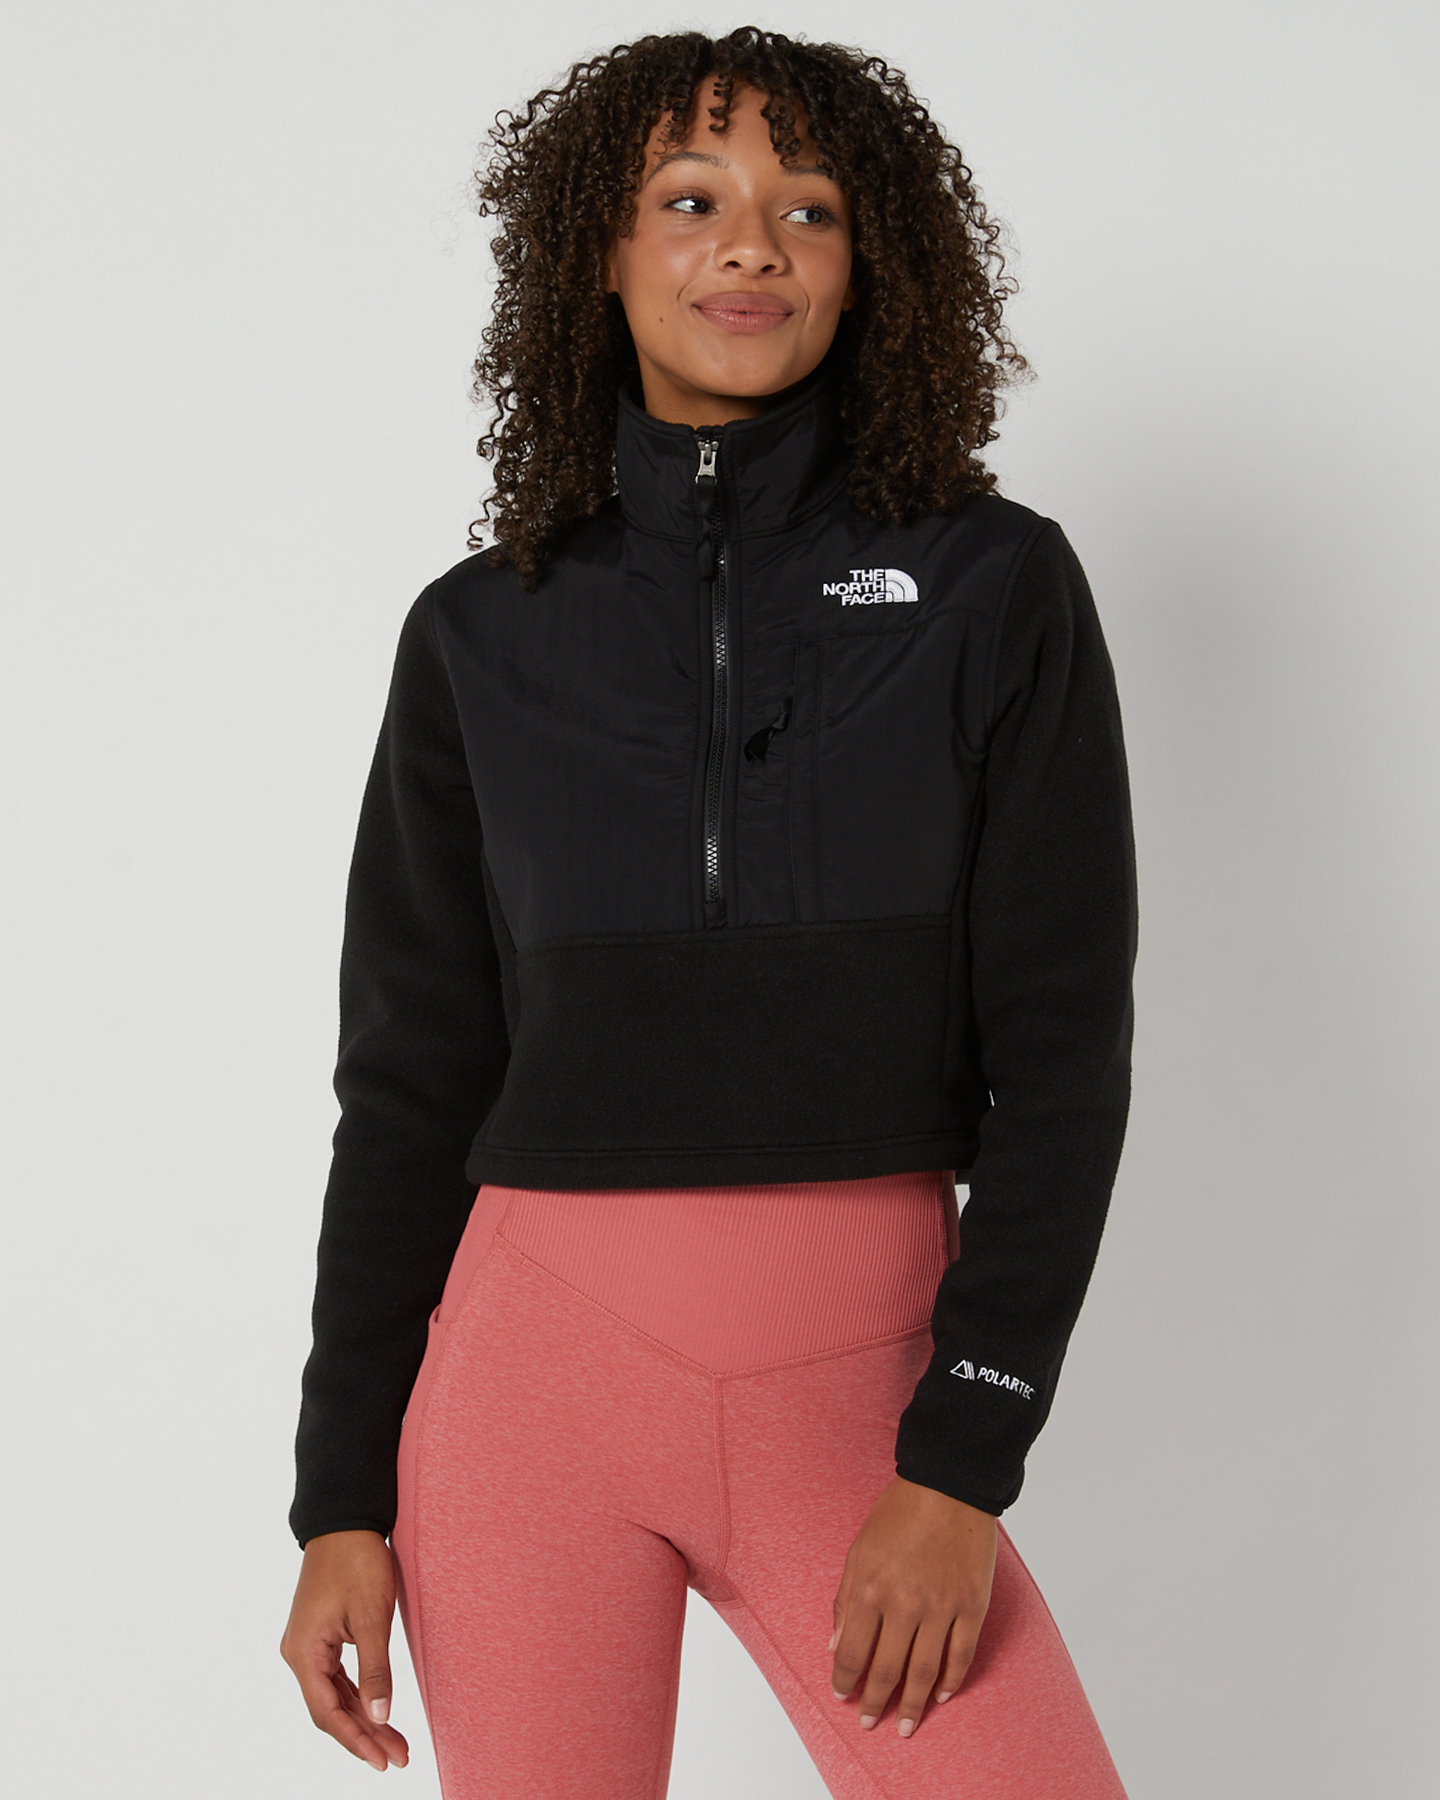 https://www.surfstitch.com/on/demandware.static/-/Sites-ss-master-catalog/default/dw291ceaea/images/NF0A7WXYJK3/TNF-BLACK-WOMENS-CLOTHING-THE-NORTH-FACE-JUMPERS-NF0A7WXYJK3_1.JPG